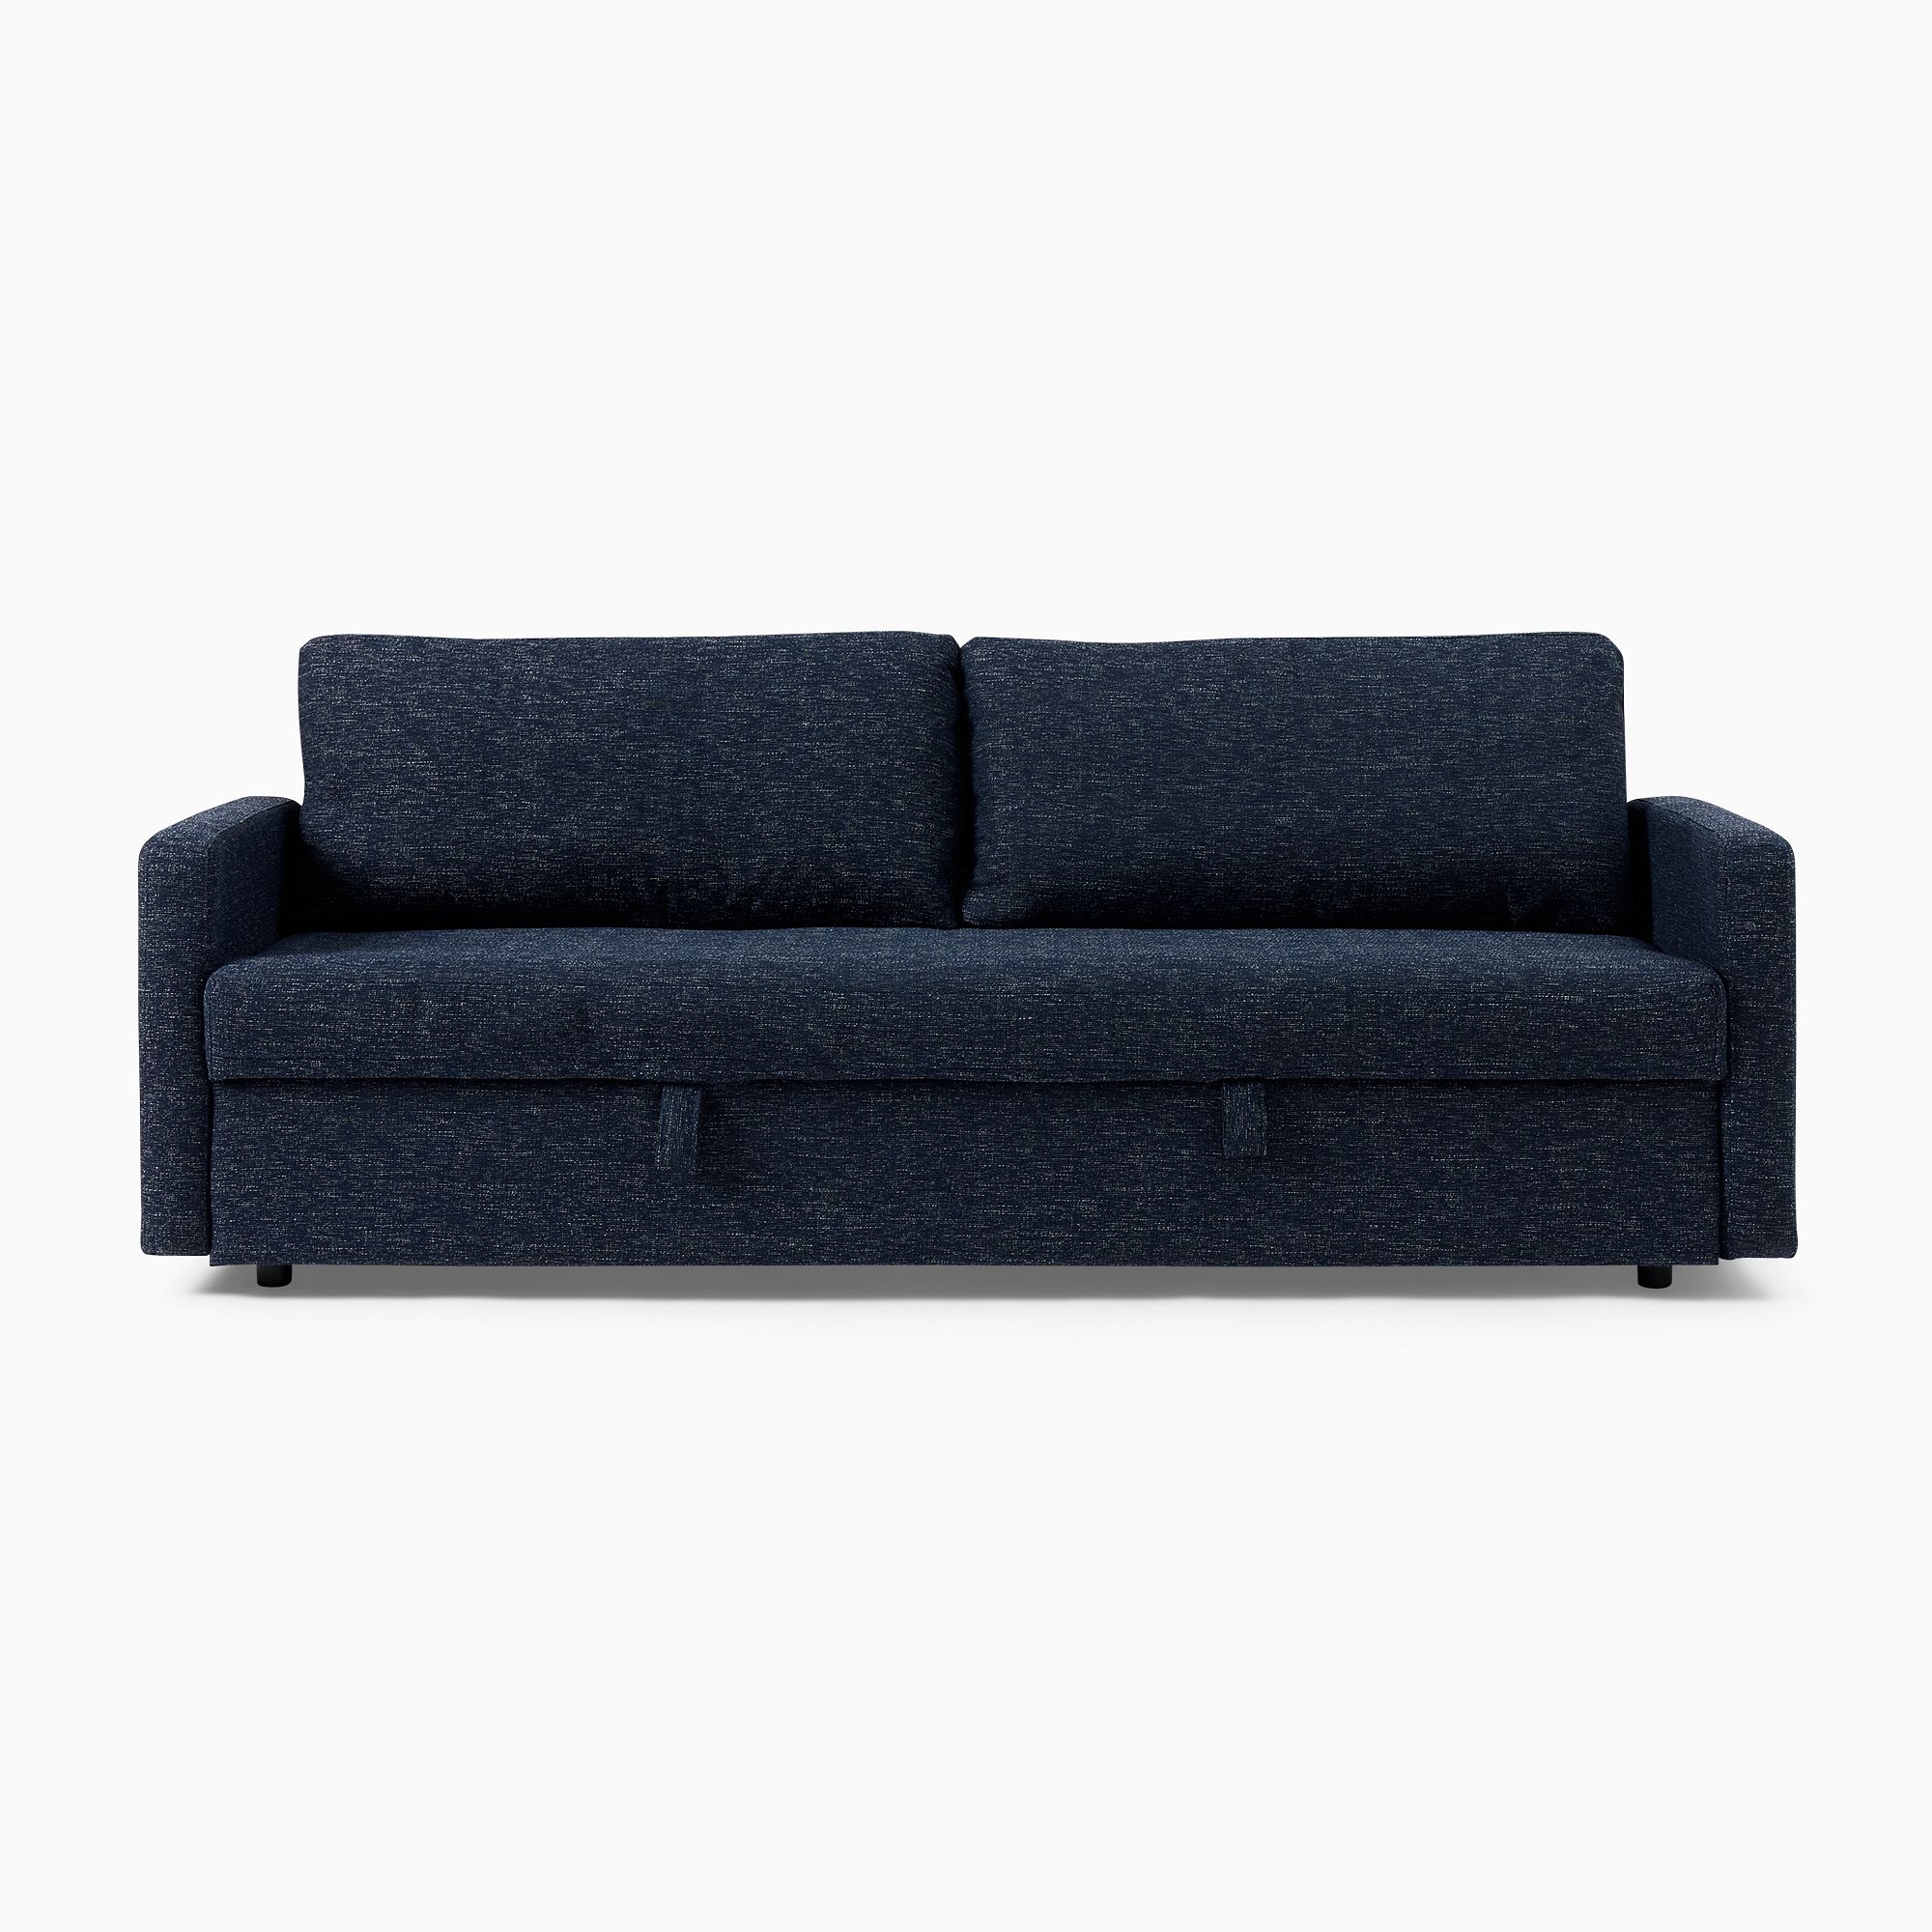 Thornton Sleeper Sofa, Deco Weave, Midnight, Concealed Supports - Image 0